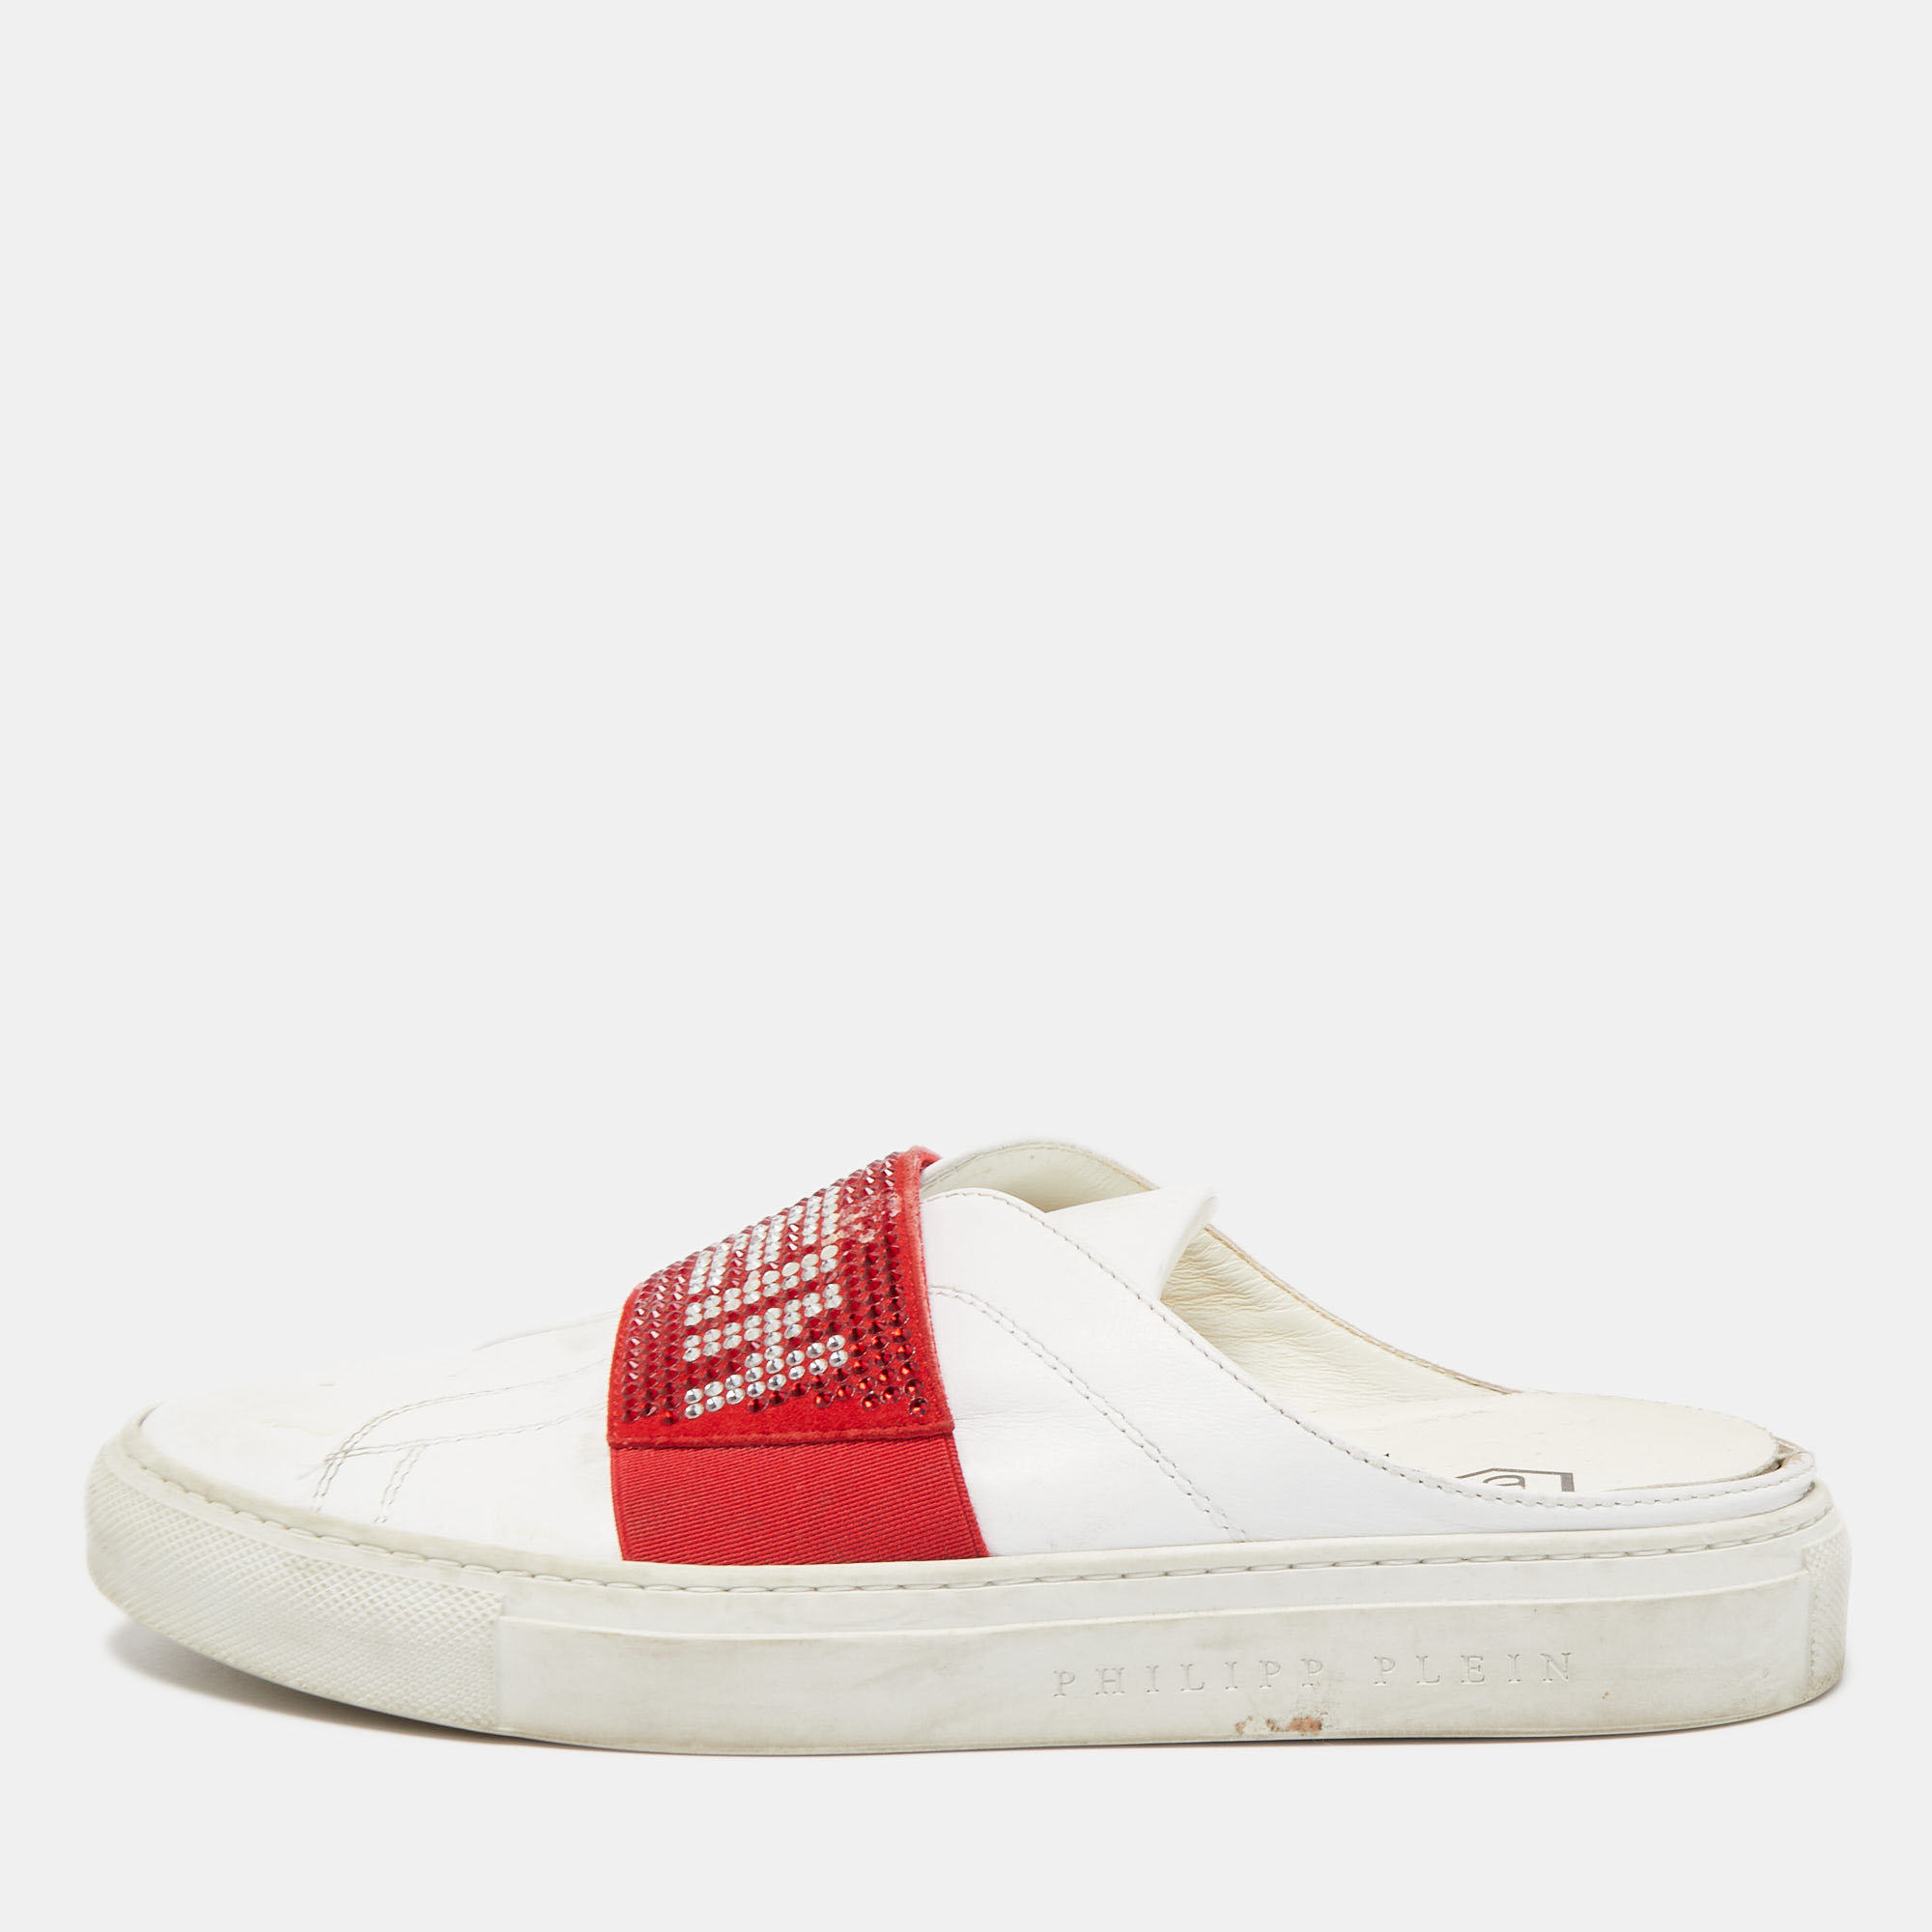 phillip plein white/red leather crystal embellished logo sneaker mules size 38